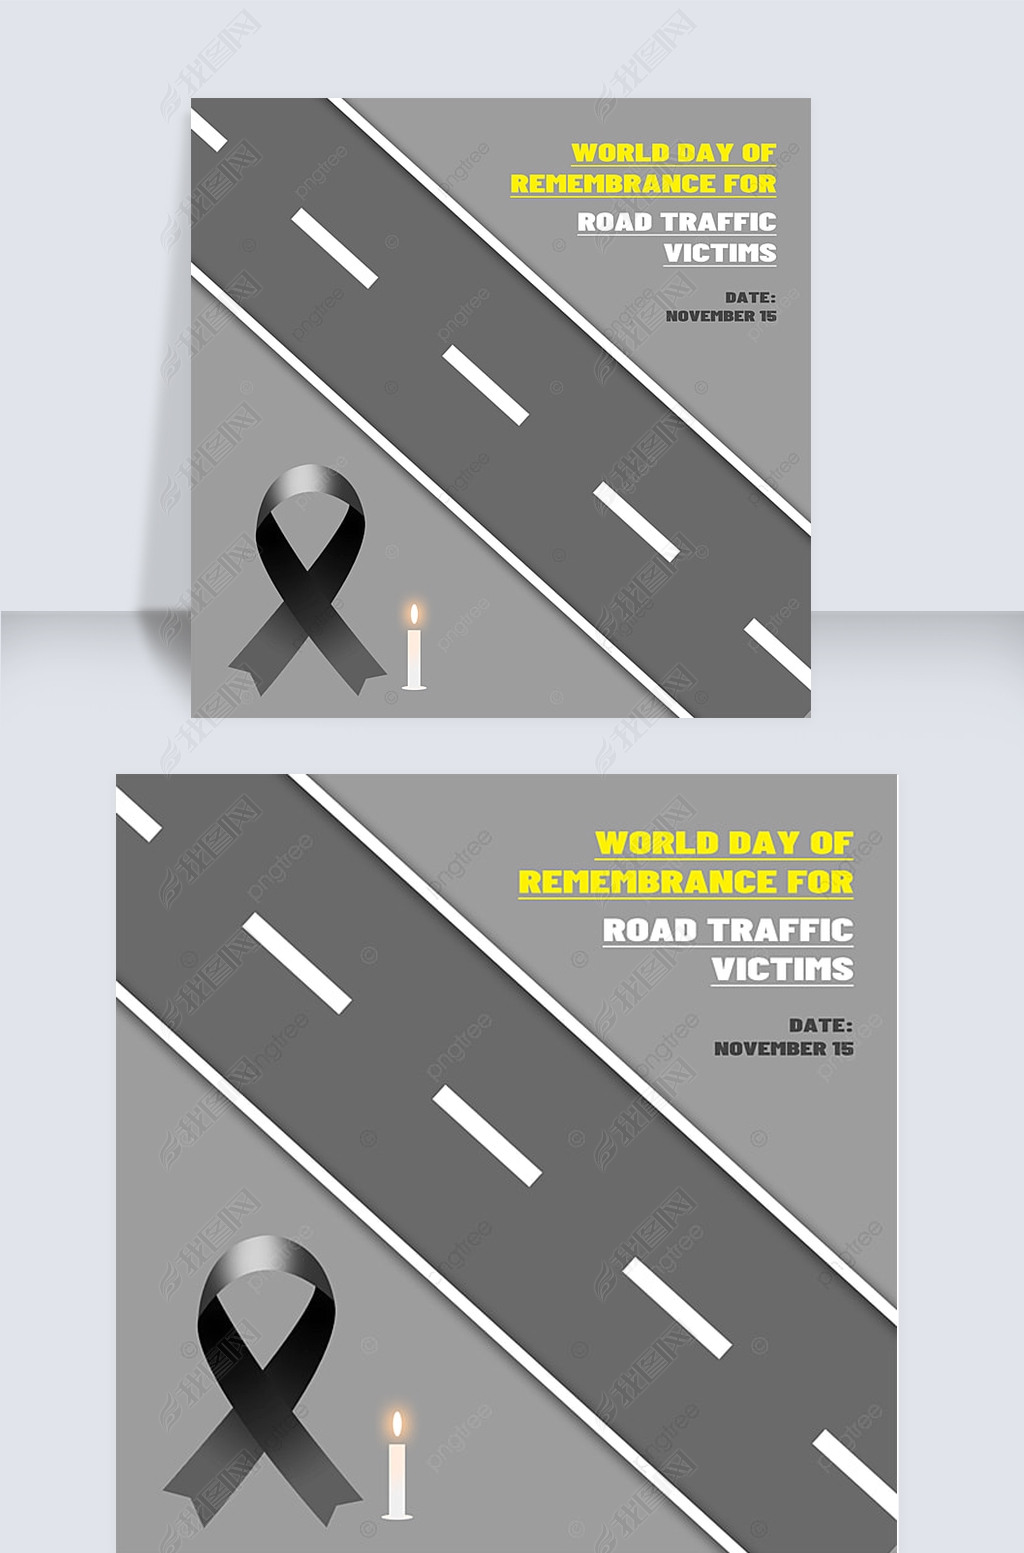  world day of remembrance for road traffic victims 罻ý